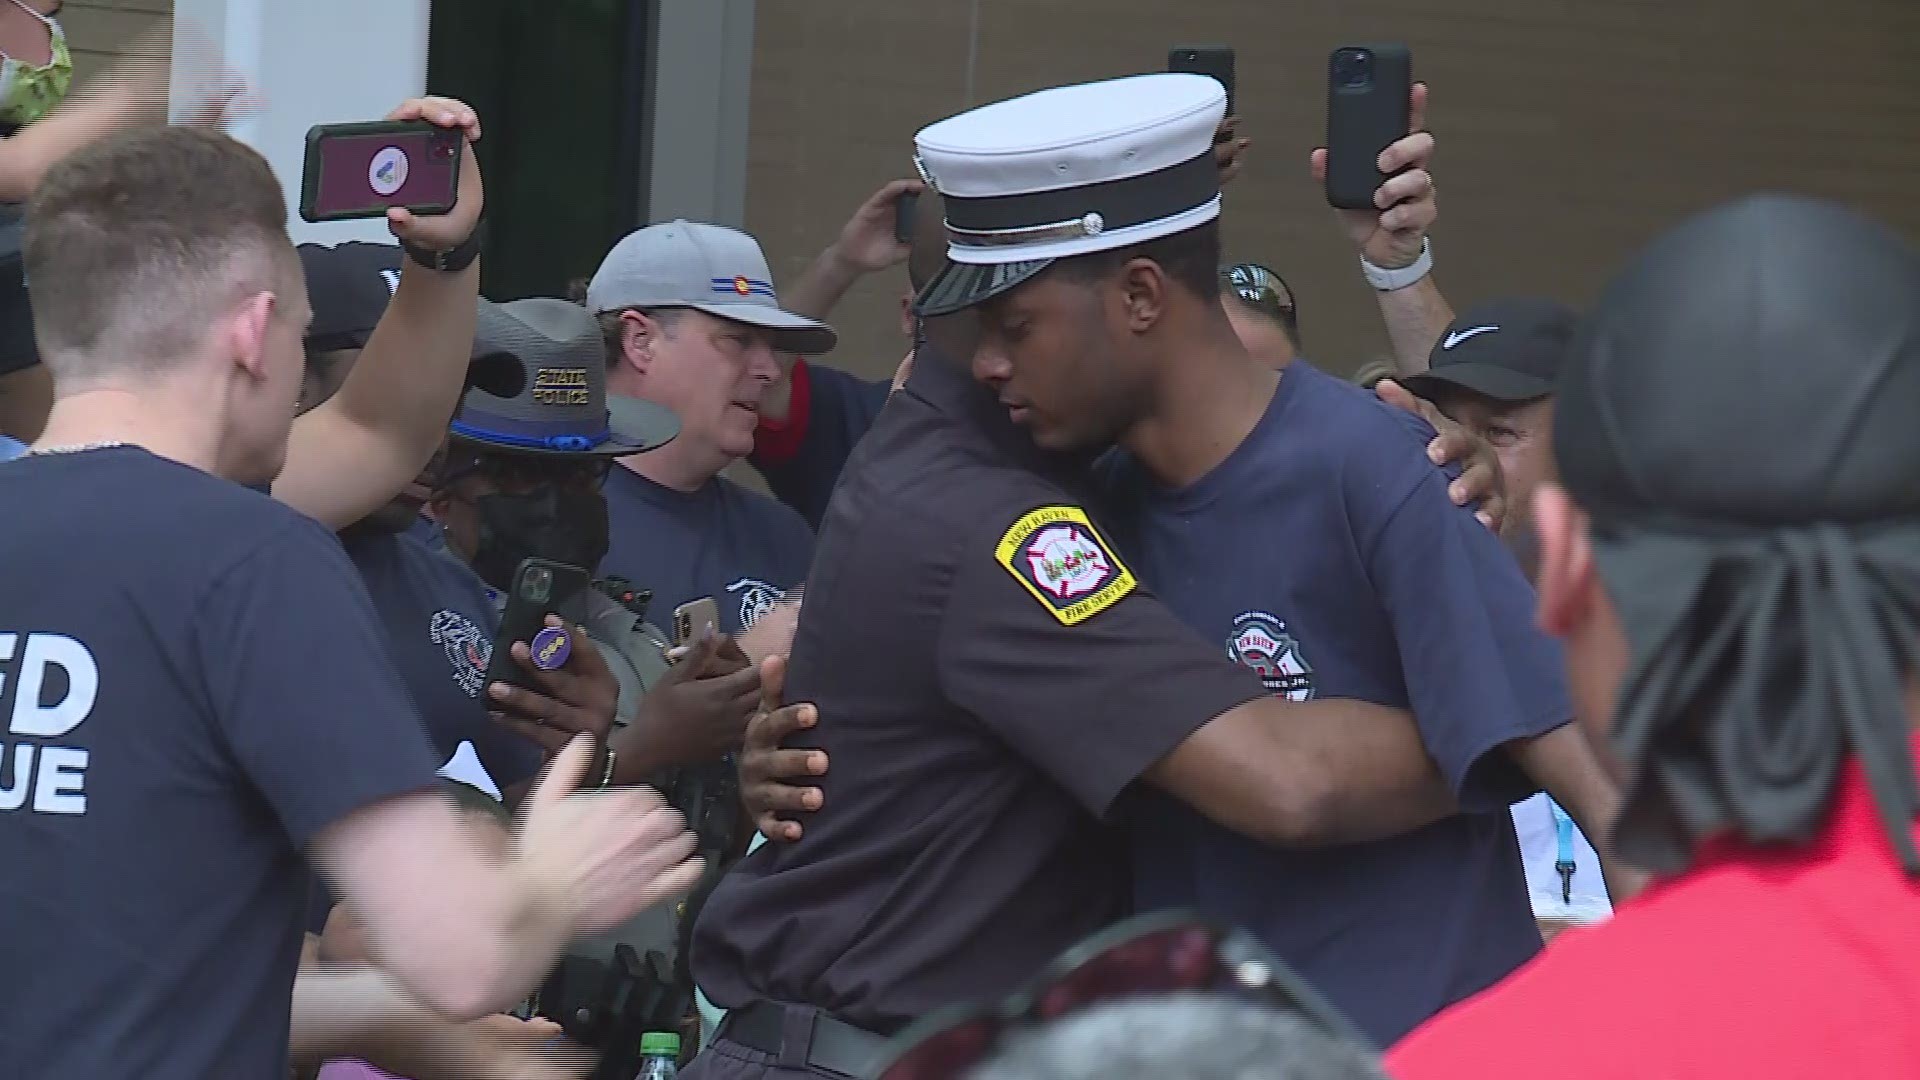 Lt. Samod Rankins spent nearly two weeks in the burn unit at Bridgeport Hospital. He was greeted by dozens of family, co-workers, and friends Sunday.